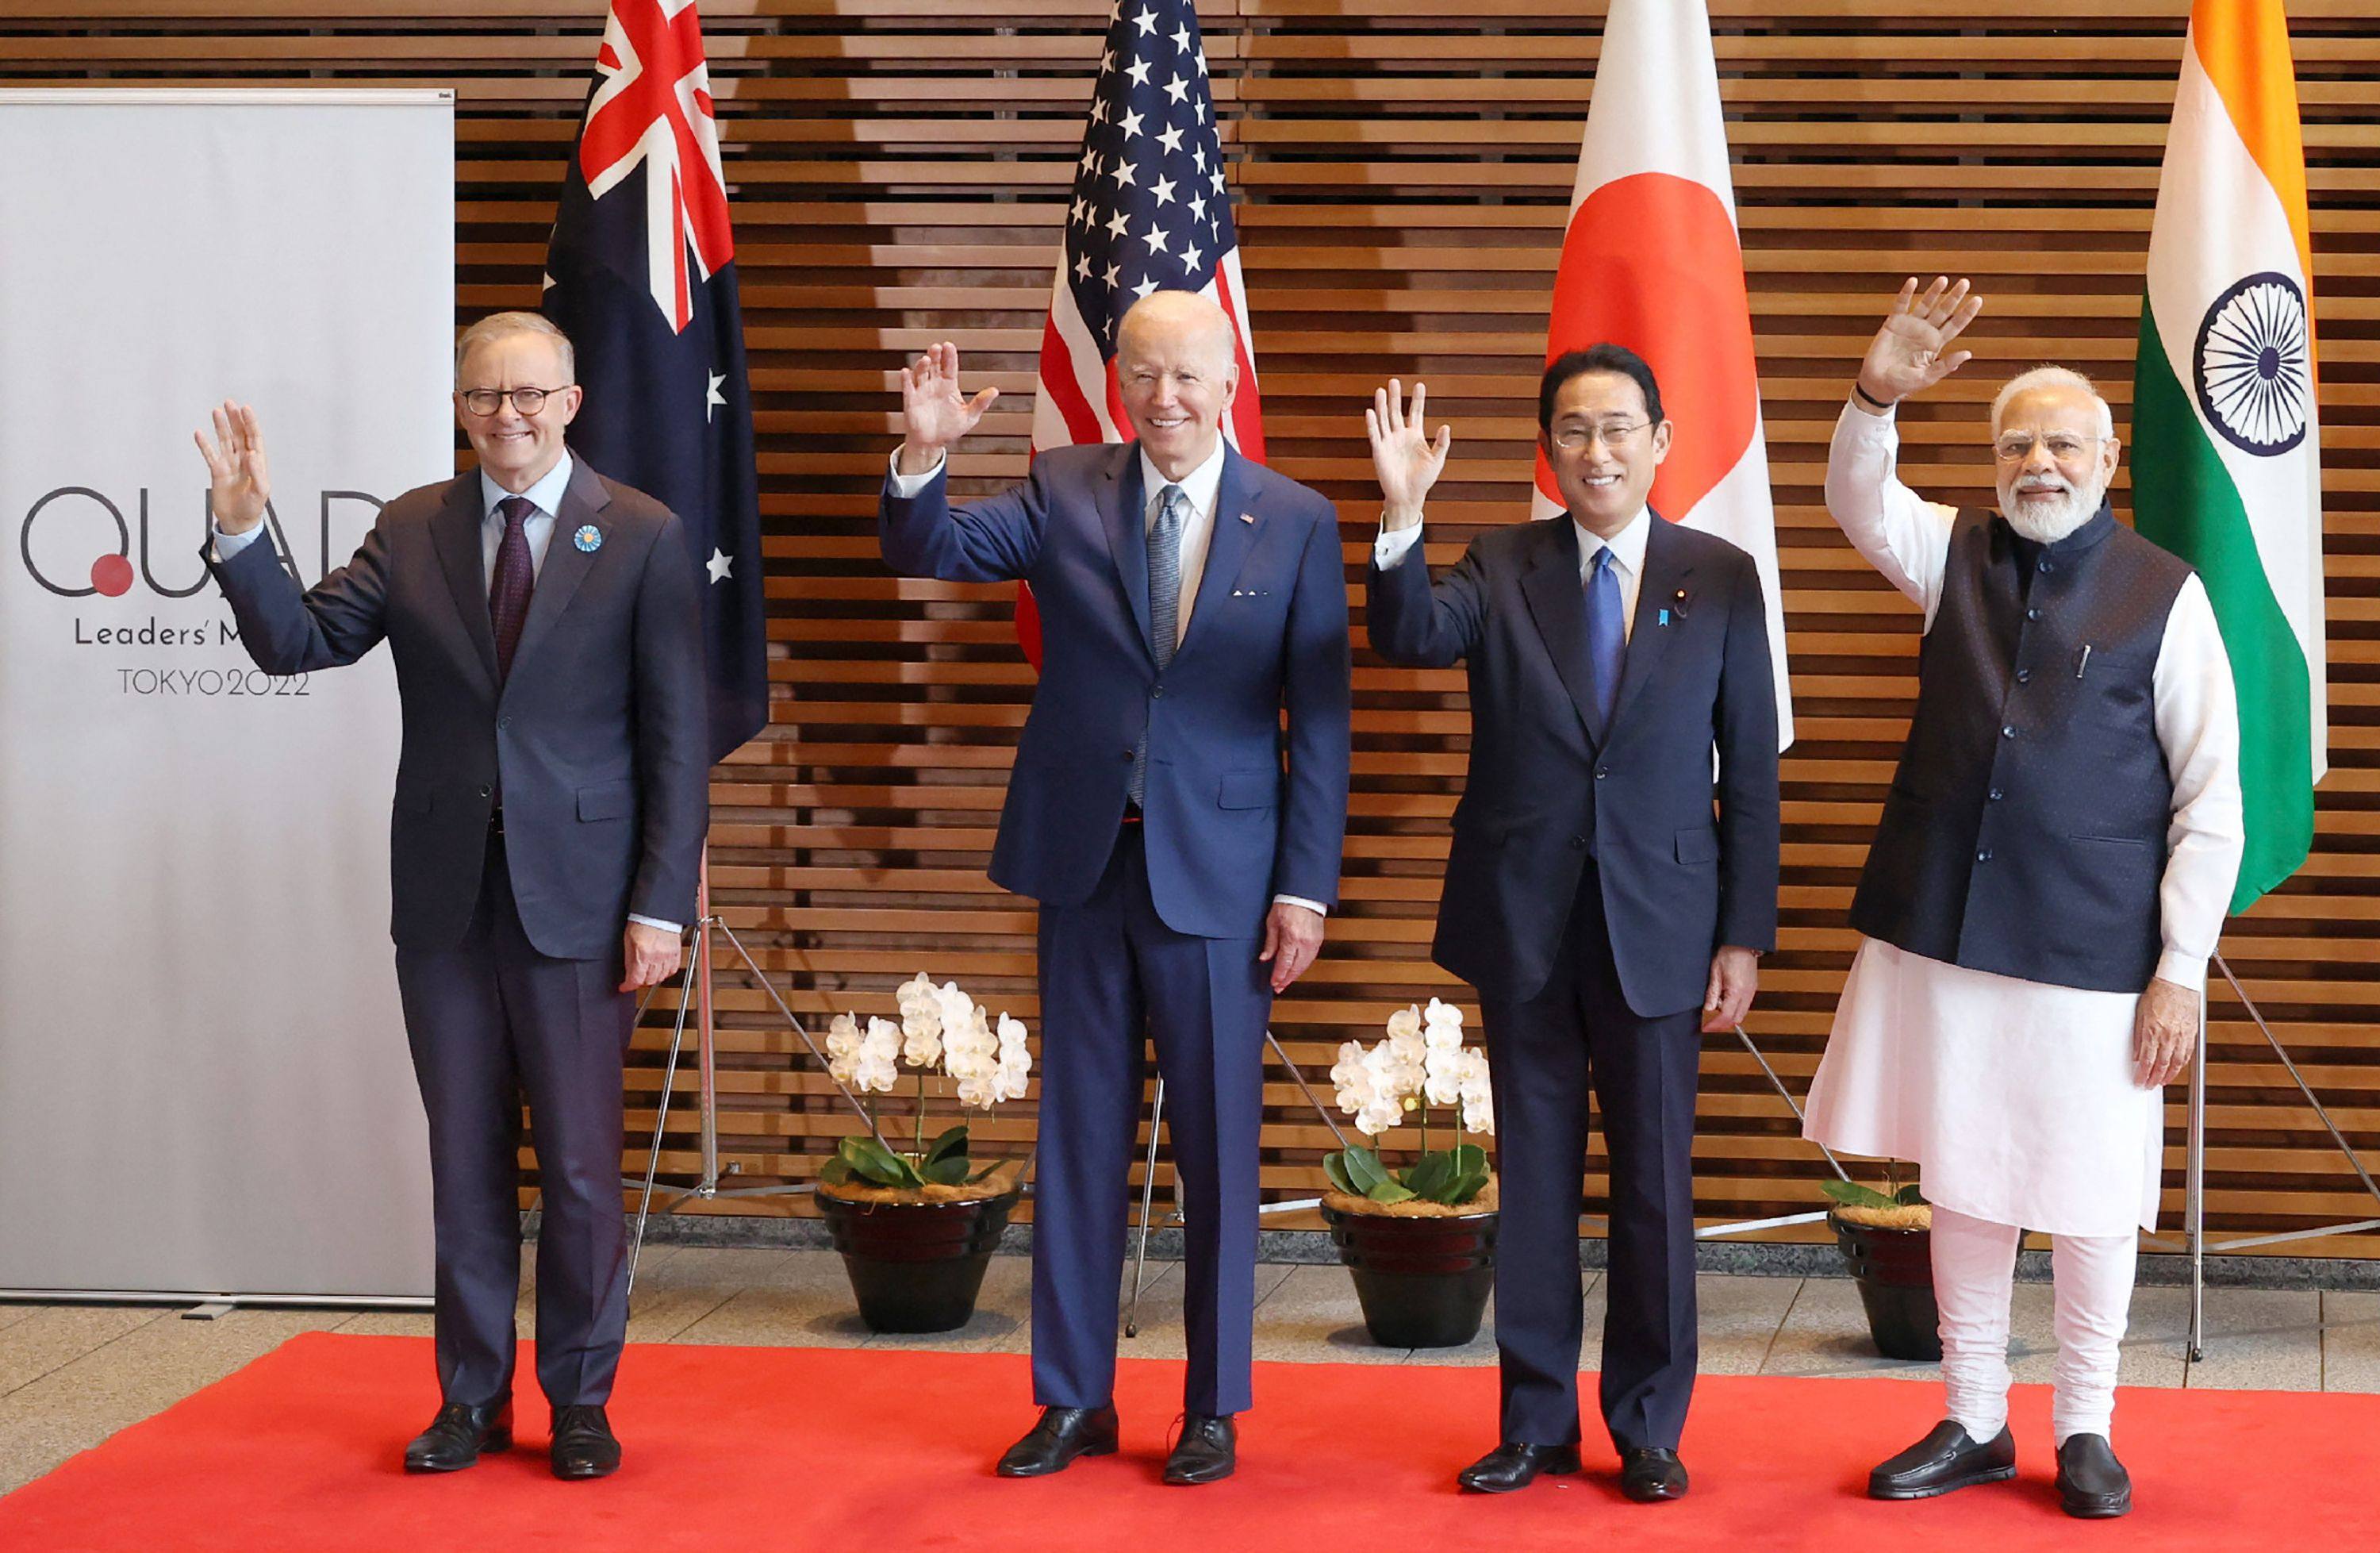 (Left to right) Australian Prime Minister Anthony Albanese, US President Joe Biden, Japanese Prime Minister Fumio Kishida and Indian Prime Minister Narendra Modi wave to the media before the Quad meeting at the Kishida’s office in Tokyo on May 24, 2022. Photo: AFP